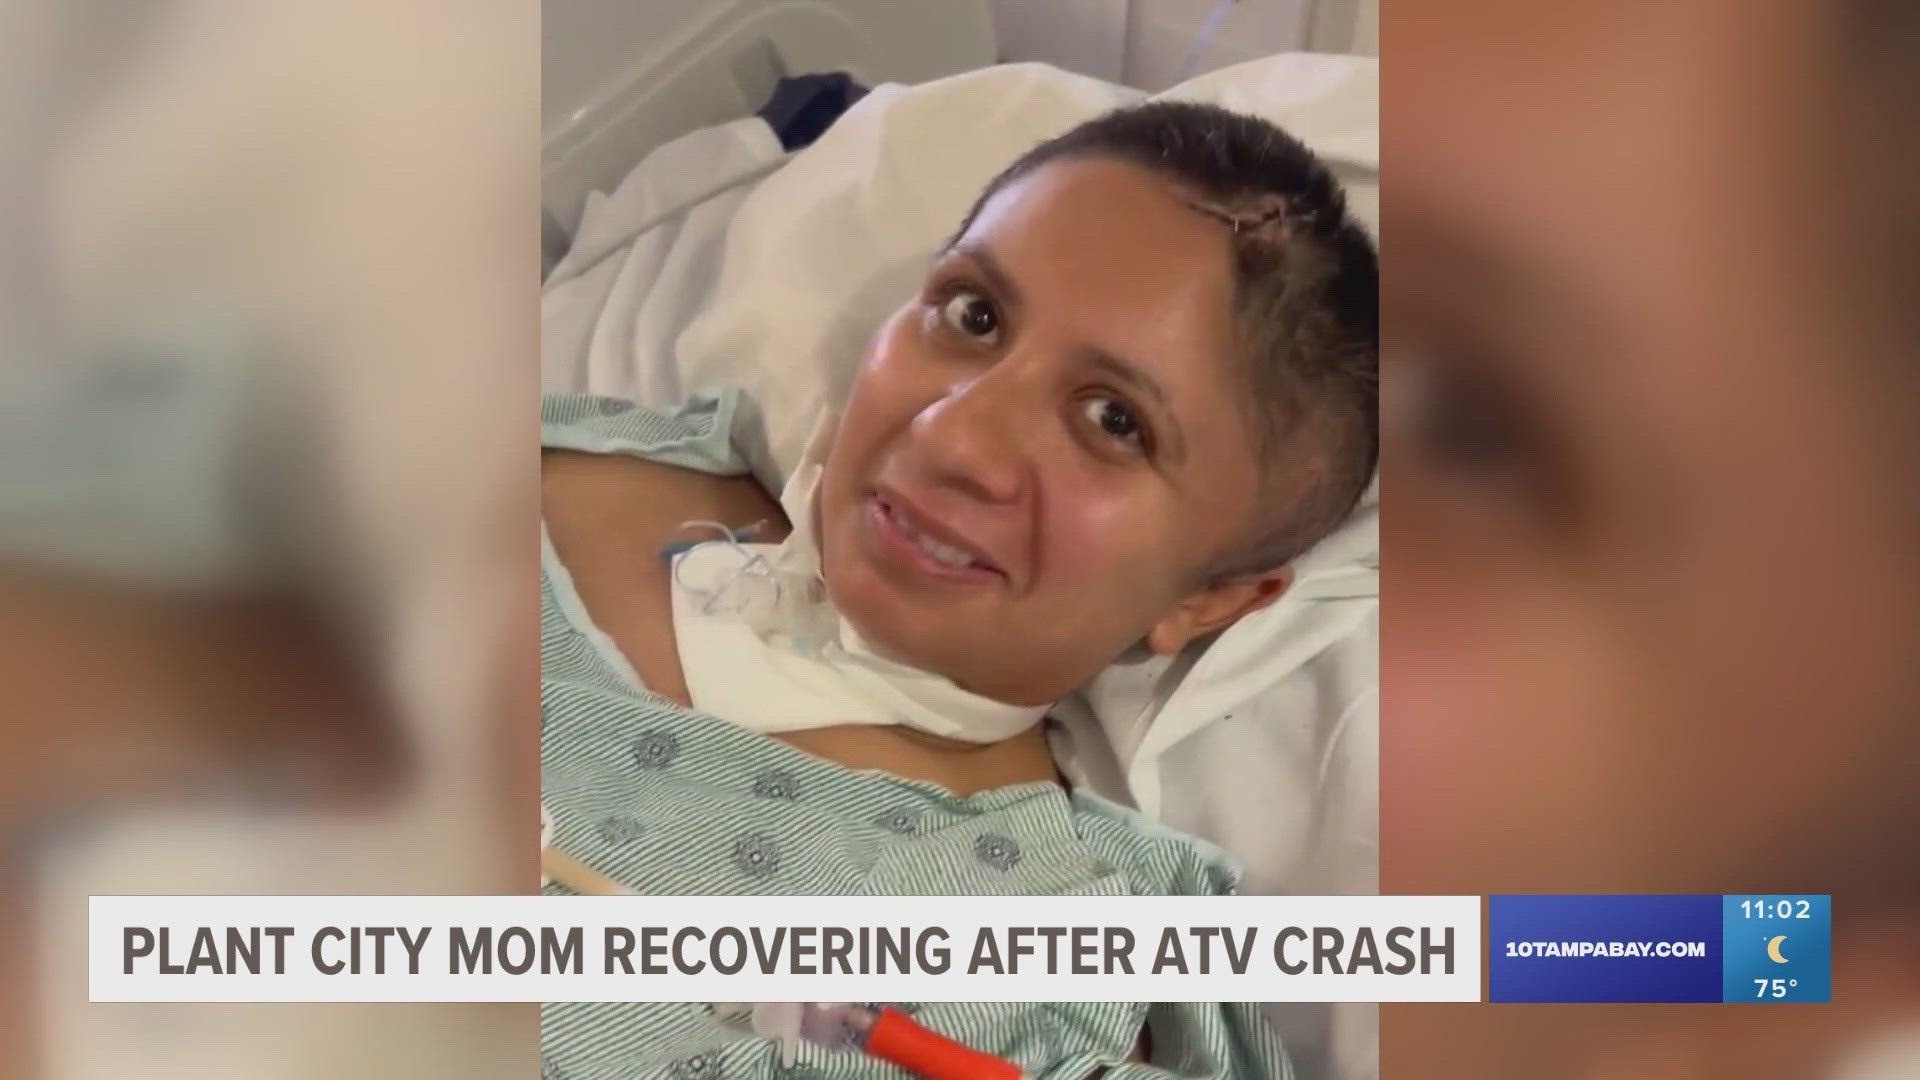 Matilde Rodriguez risked her life to save her 6-year-old son during the accident last month.